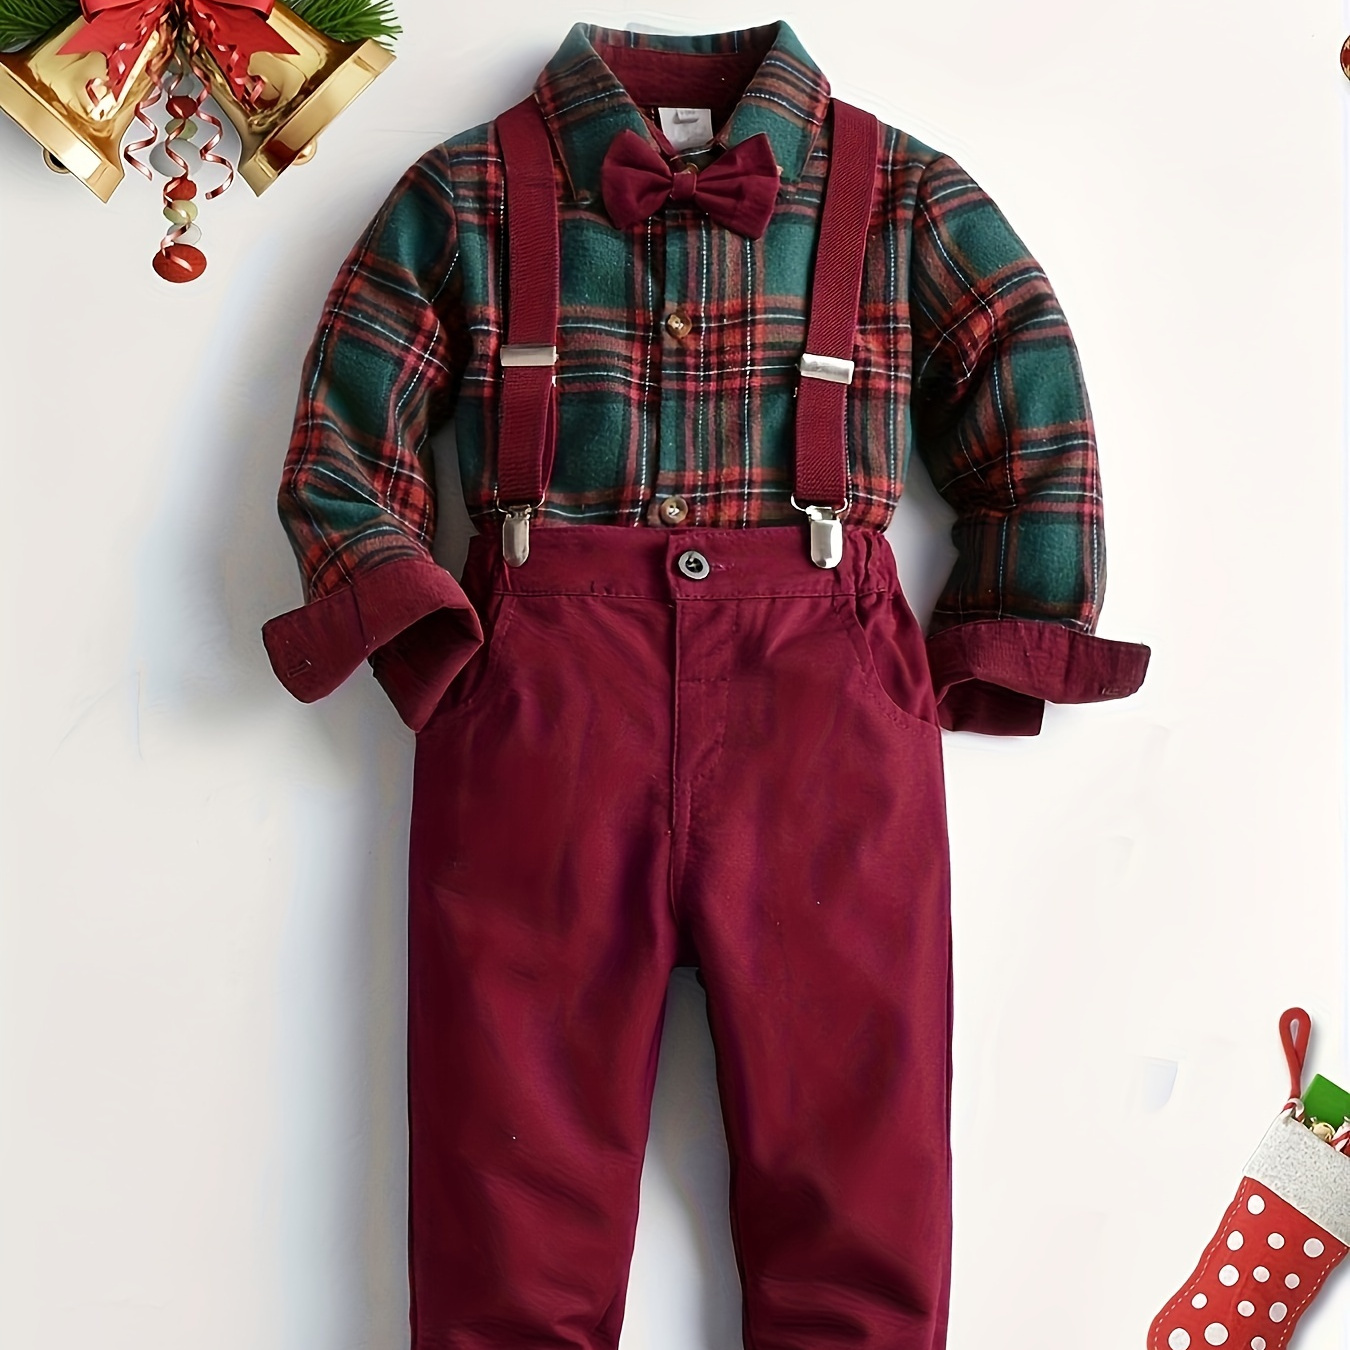 

Boy's Christmas Style Gentleman Outfit, Plaid Pattern Bowtie Shirt & Vest & Overalls Set, Formal Wear For Speech Performance Birthday Party, Kid's Clothes For Spring Fall Winter